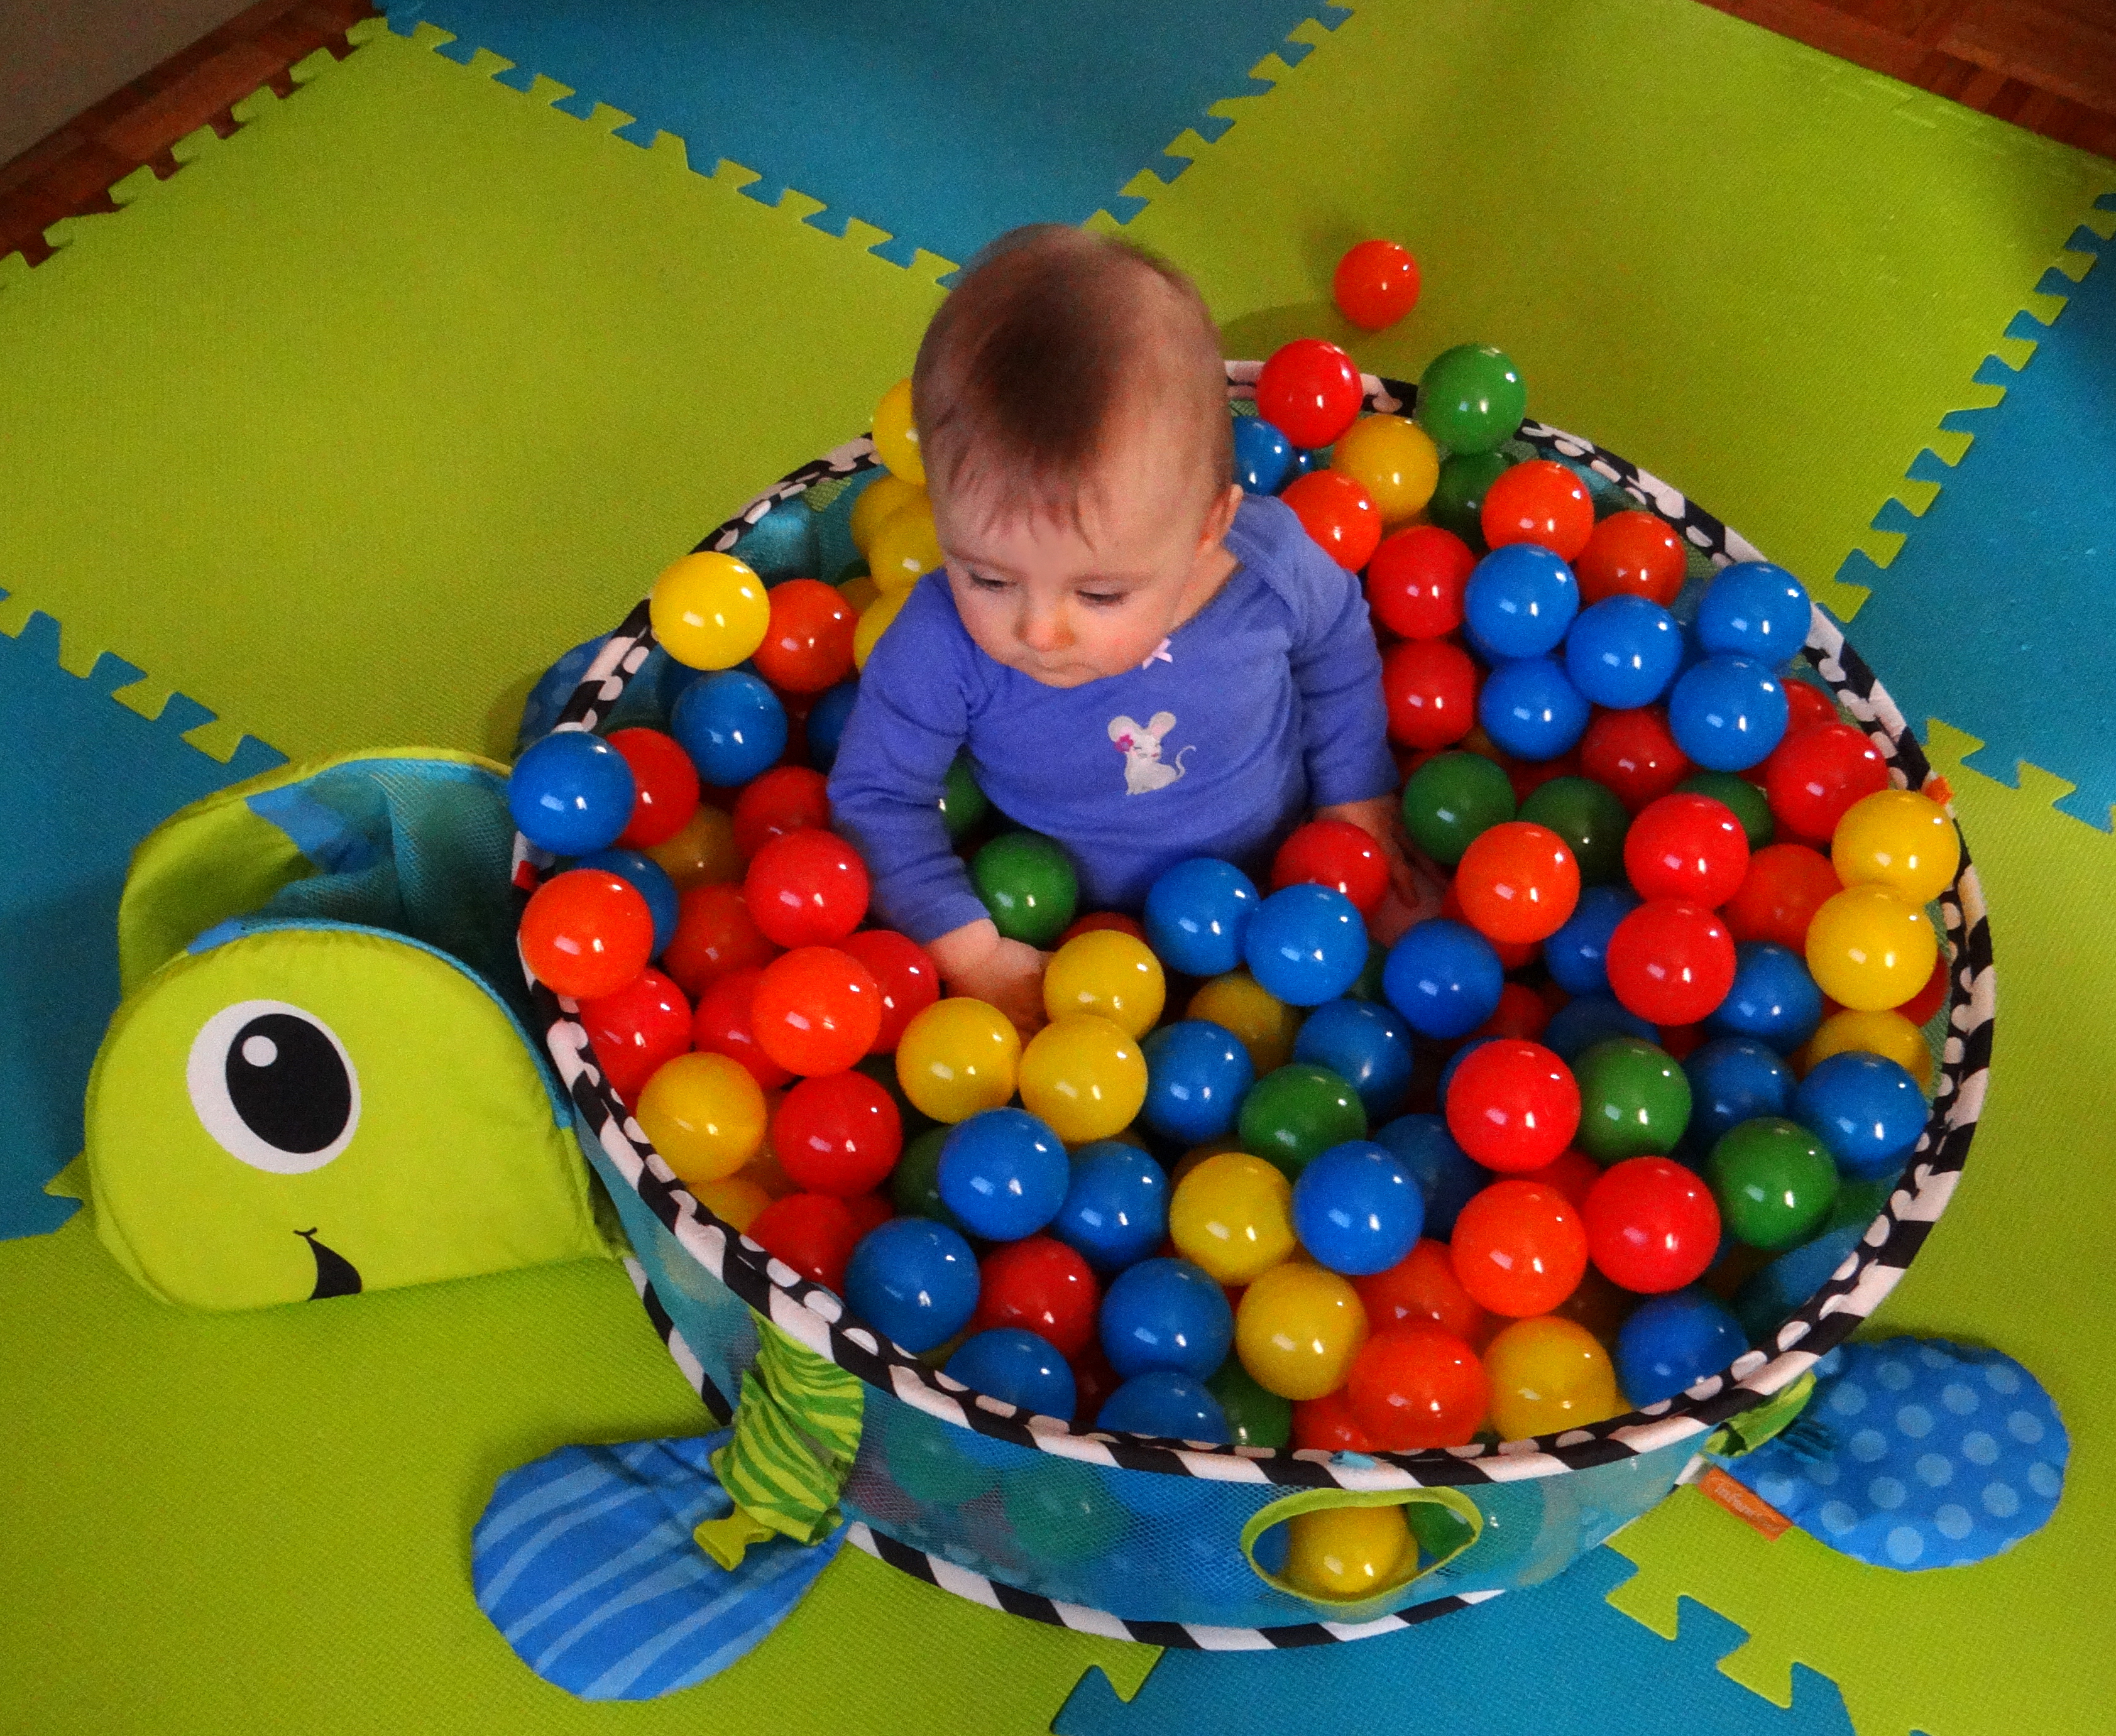 Baby in the Infantino Grow-With-Me Activity Gym & Ball Pit